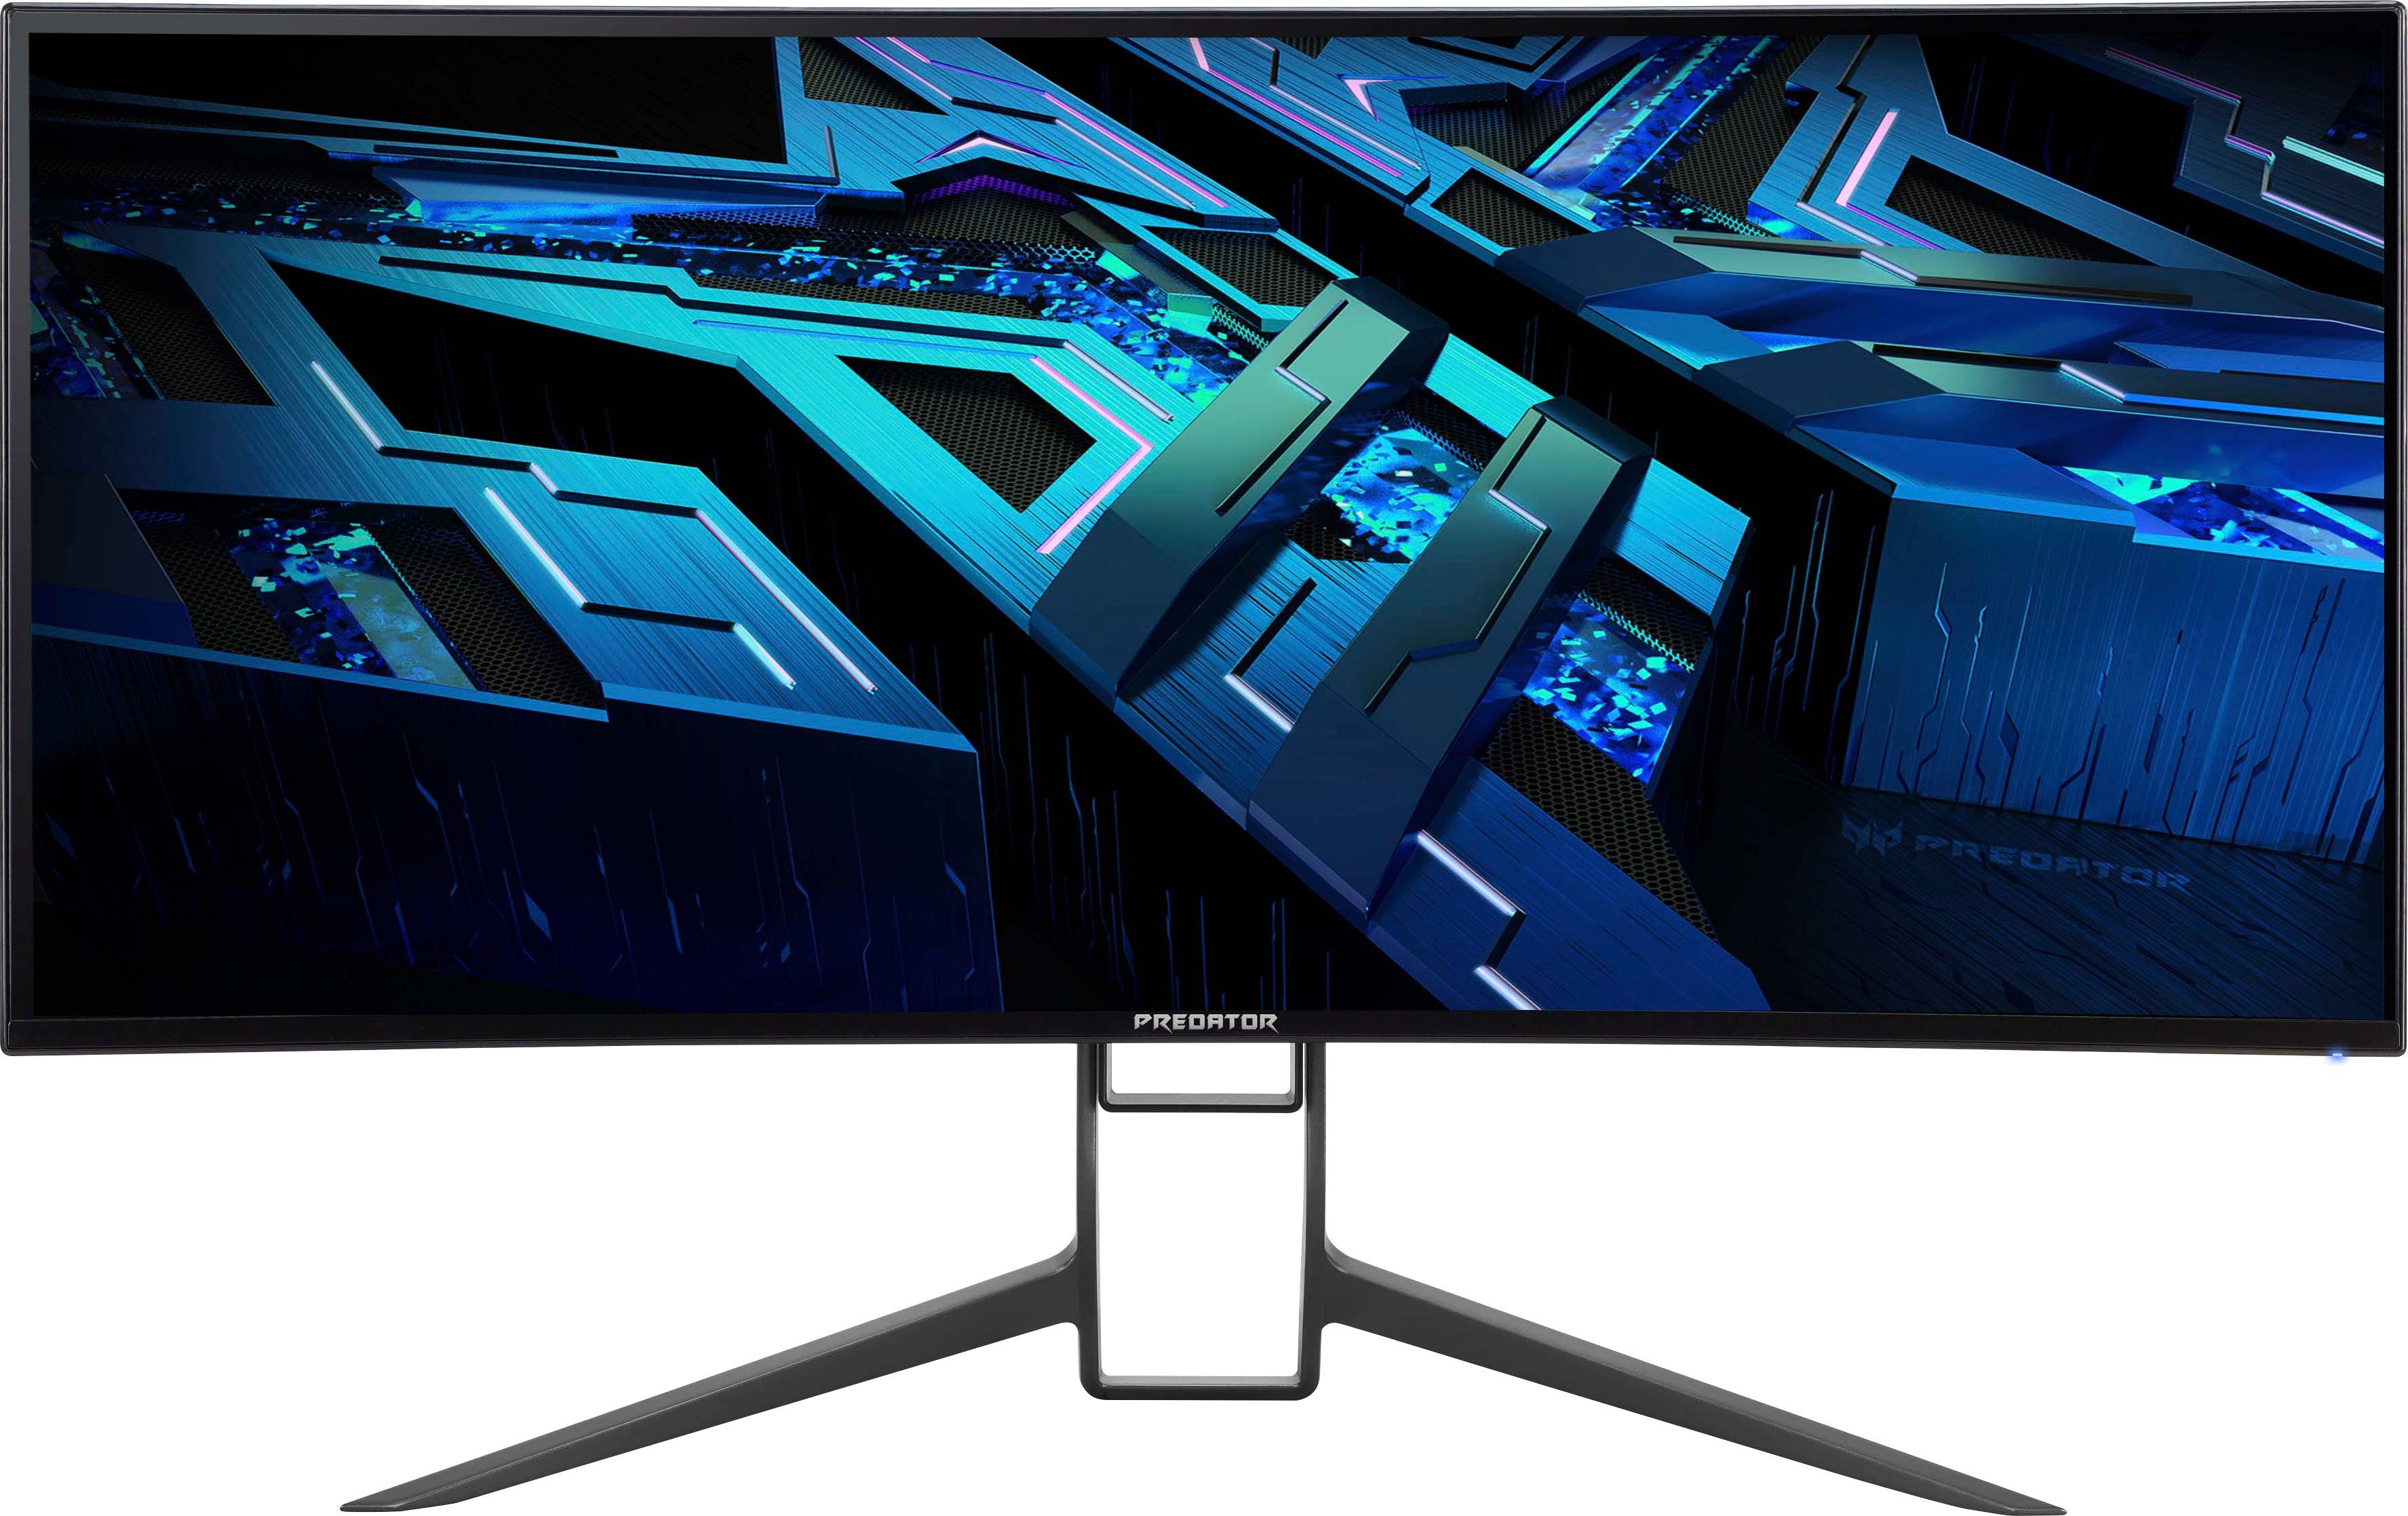 Reaktionszeit, ", x Acer ms 3440 IPS-LED) Hz, 1440 180 X34GS Curved-Gaming-LED-Monitor 0,5 (86,4 Predator px, cm/34